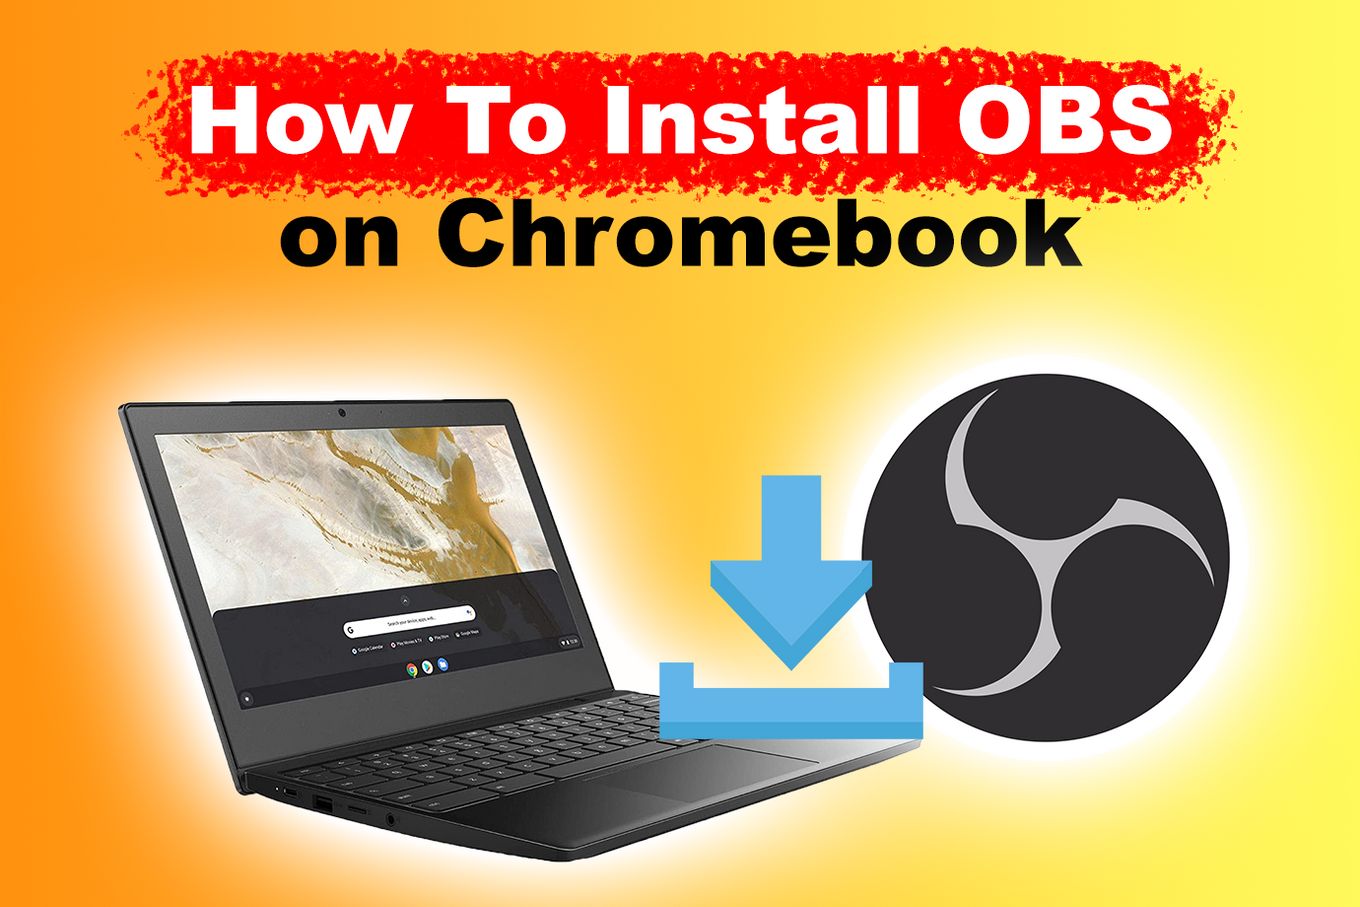 Install OBS on Chromebook